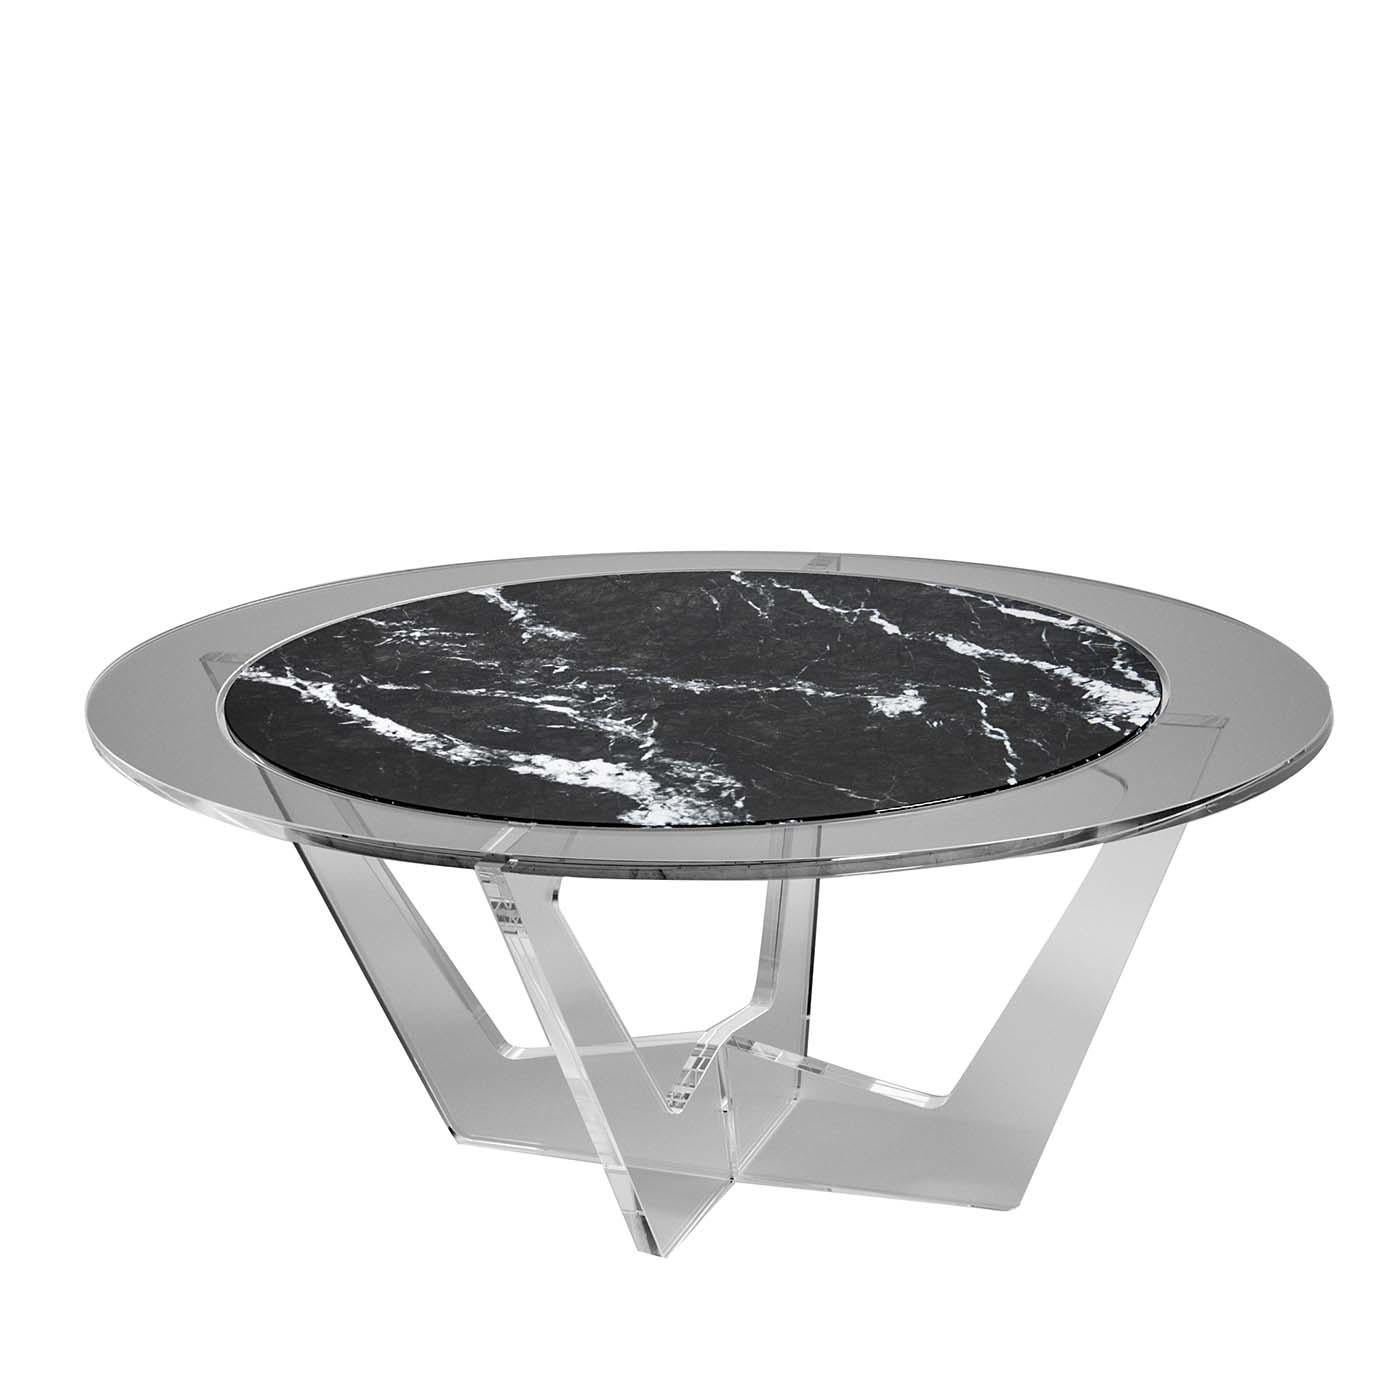 Modern Hac Gray Oval Coffee Table with Carnico Marble-Top by Madea Milano